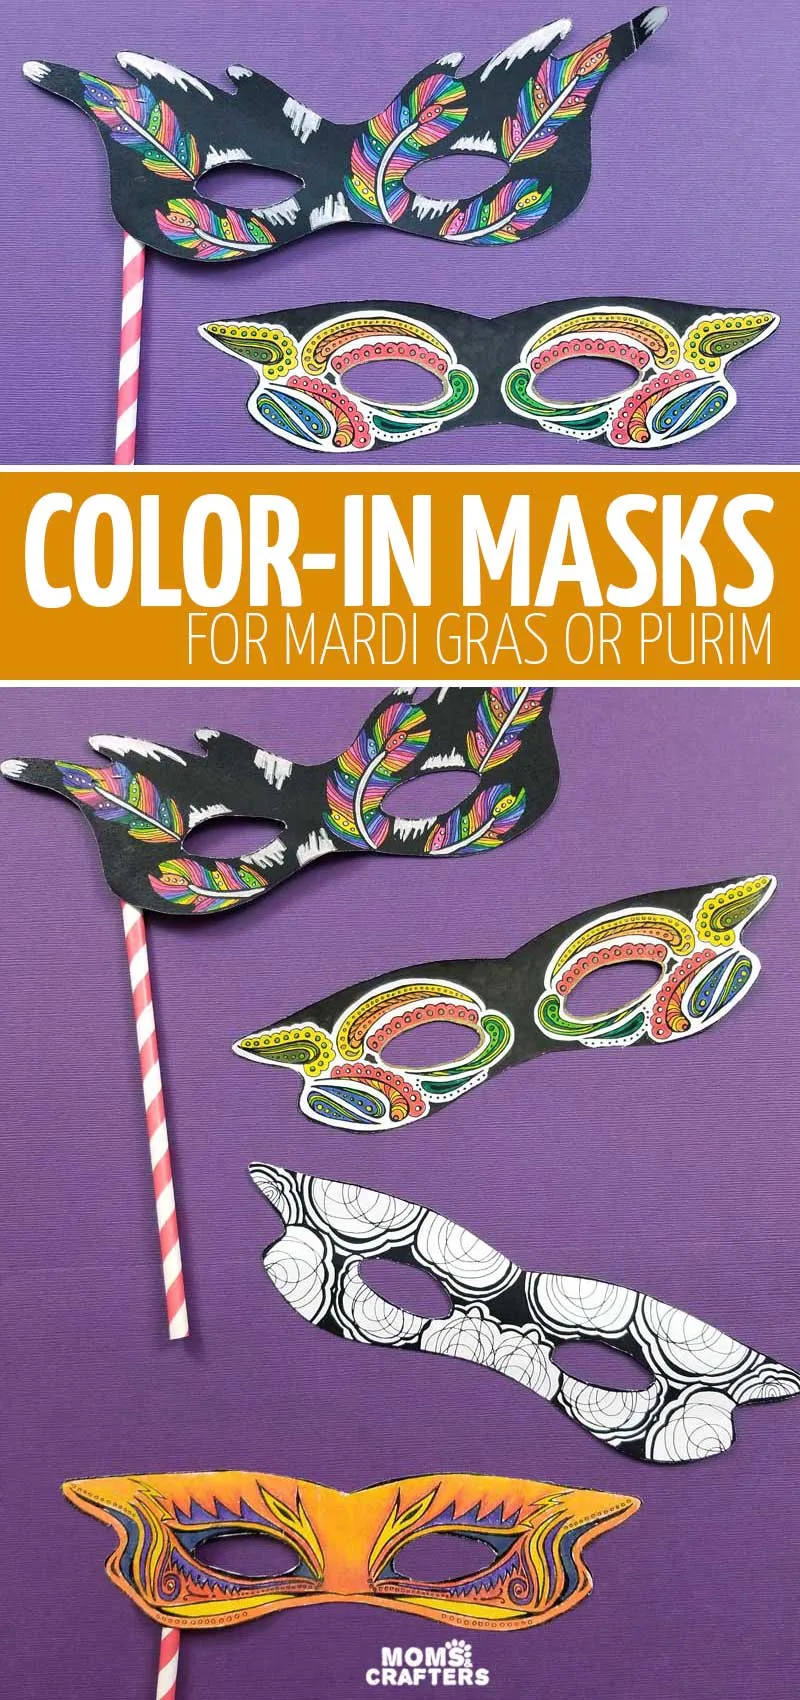 Grab this bundle of mardi gras masks and color-in masks for kids and adults! These cool printable coloring pages include a free sample for you to try it for mardi gras, purim, or halloween. 